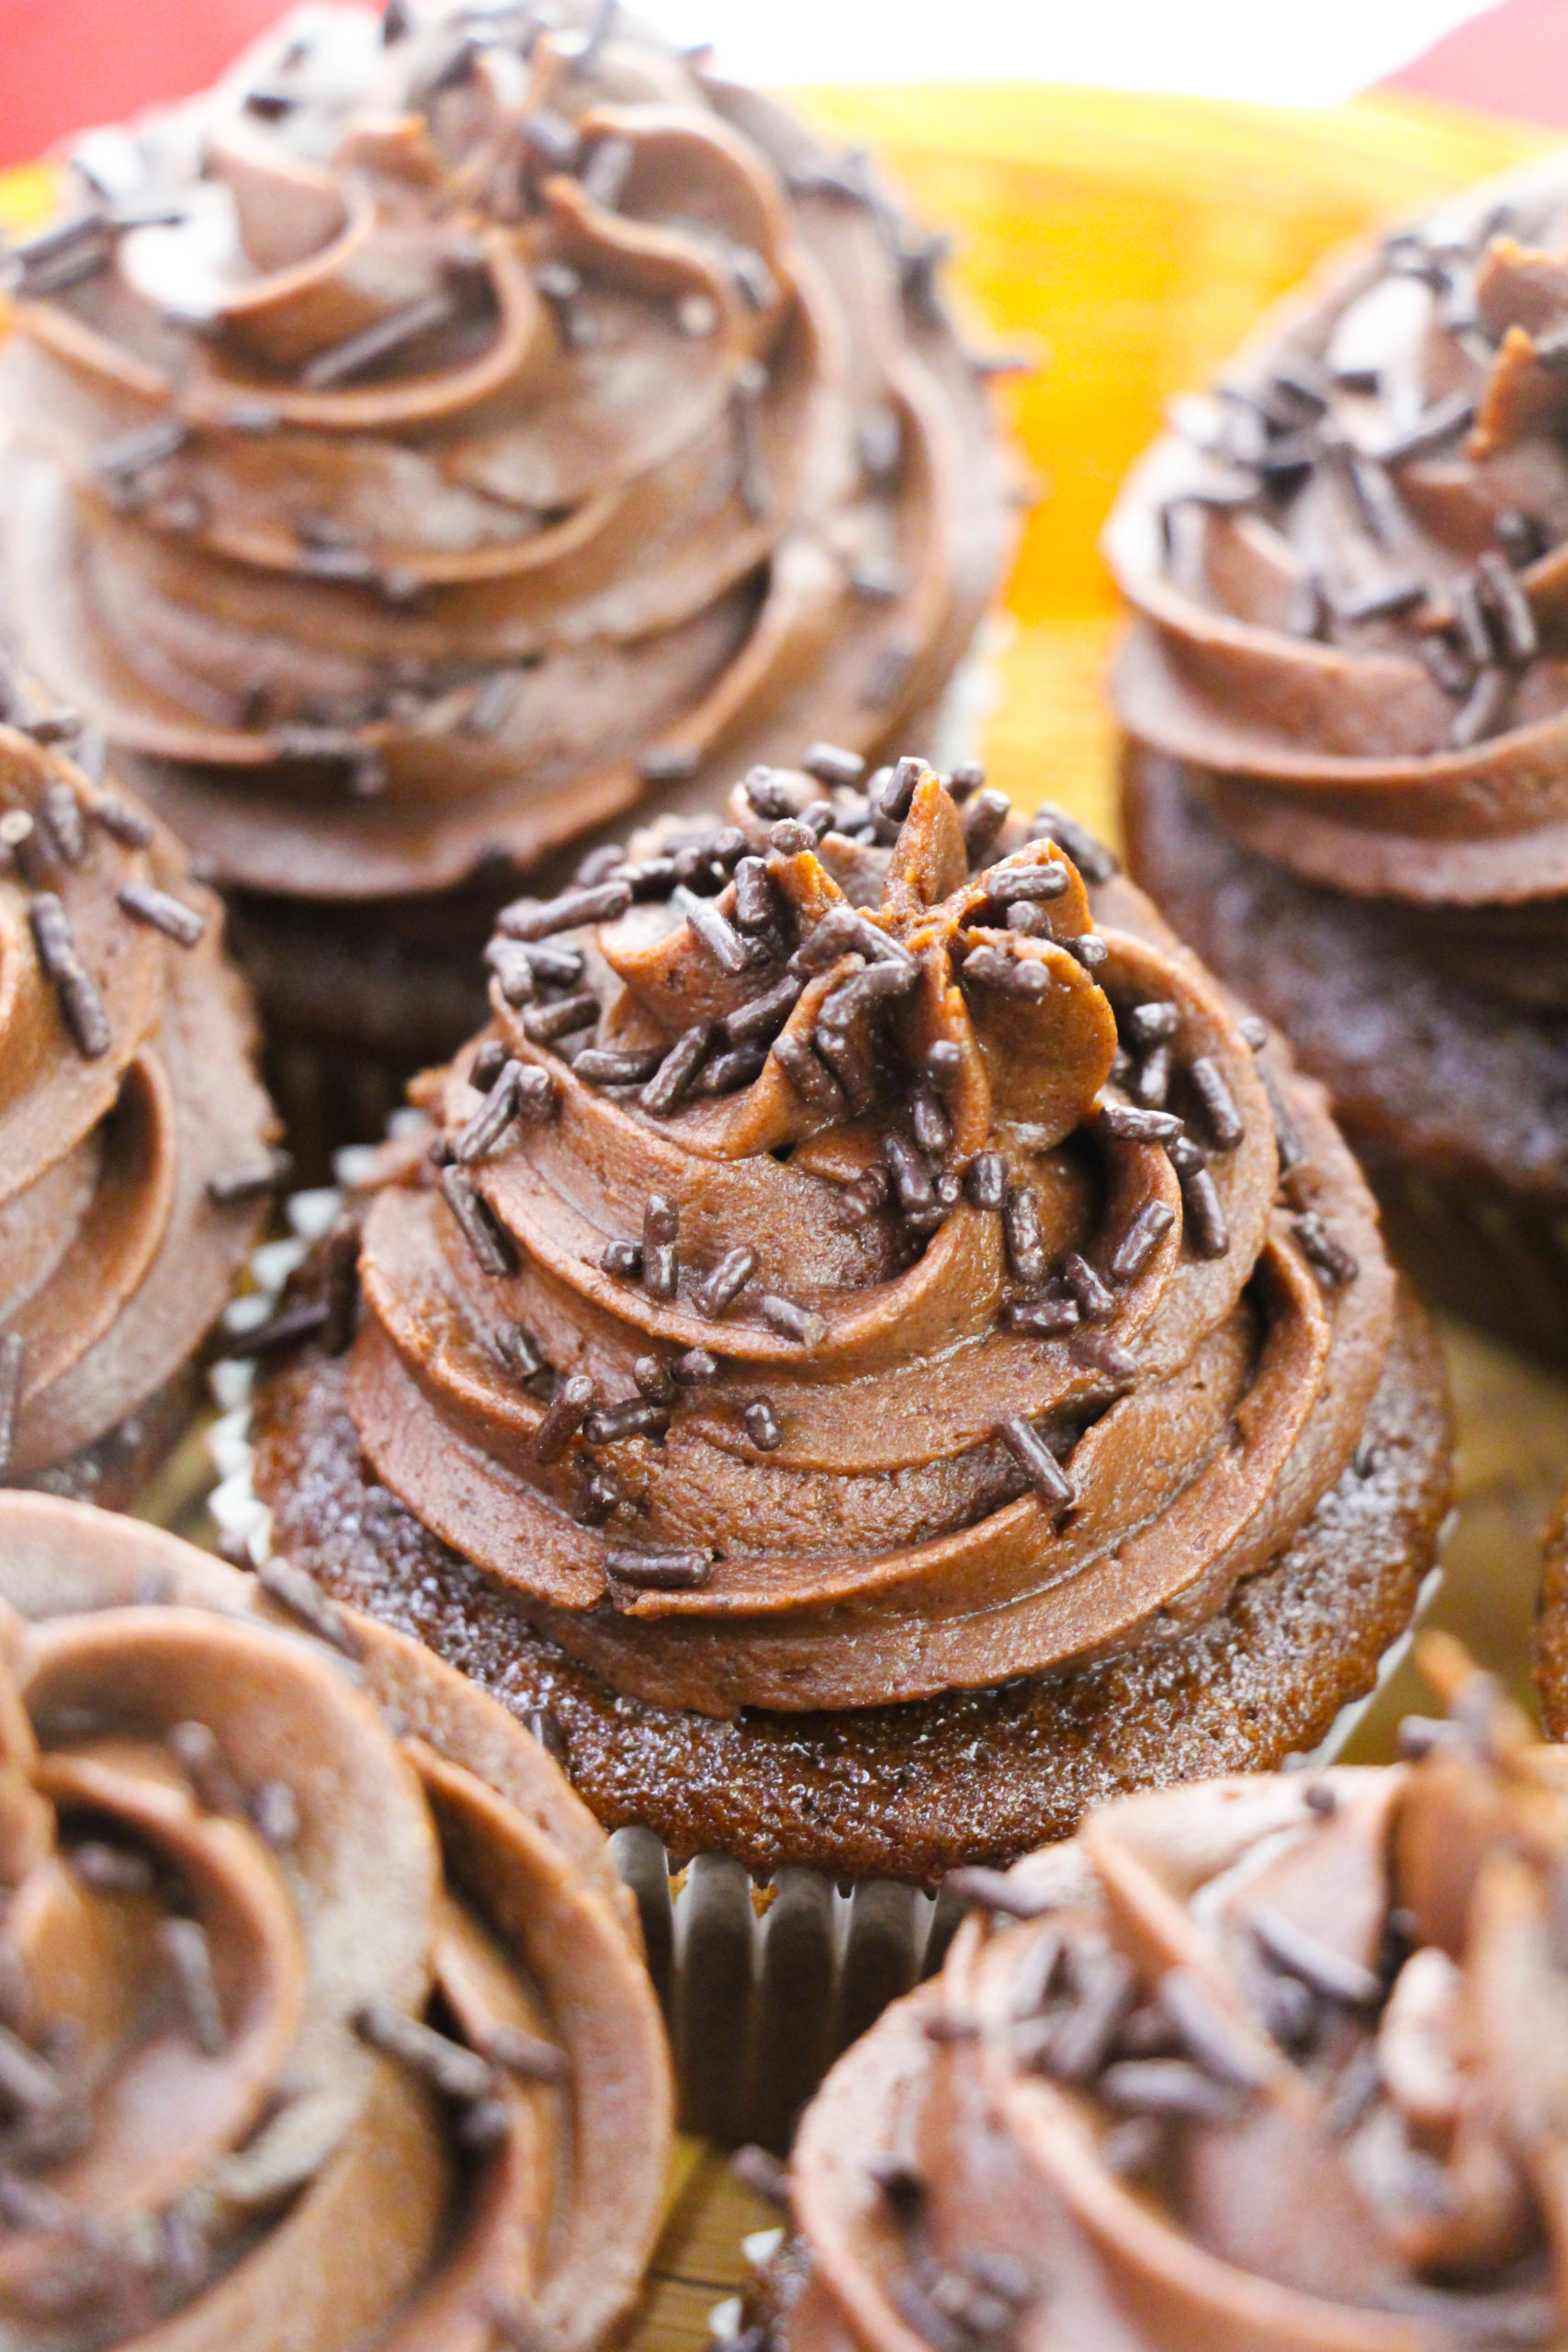 A group of cupcakes with the chocolate frosting.